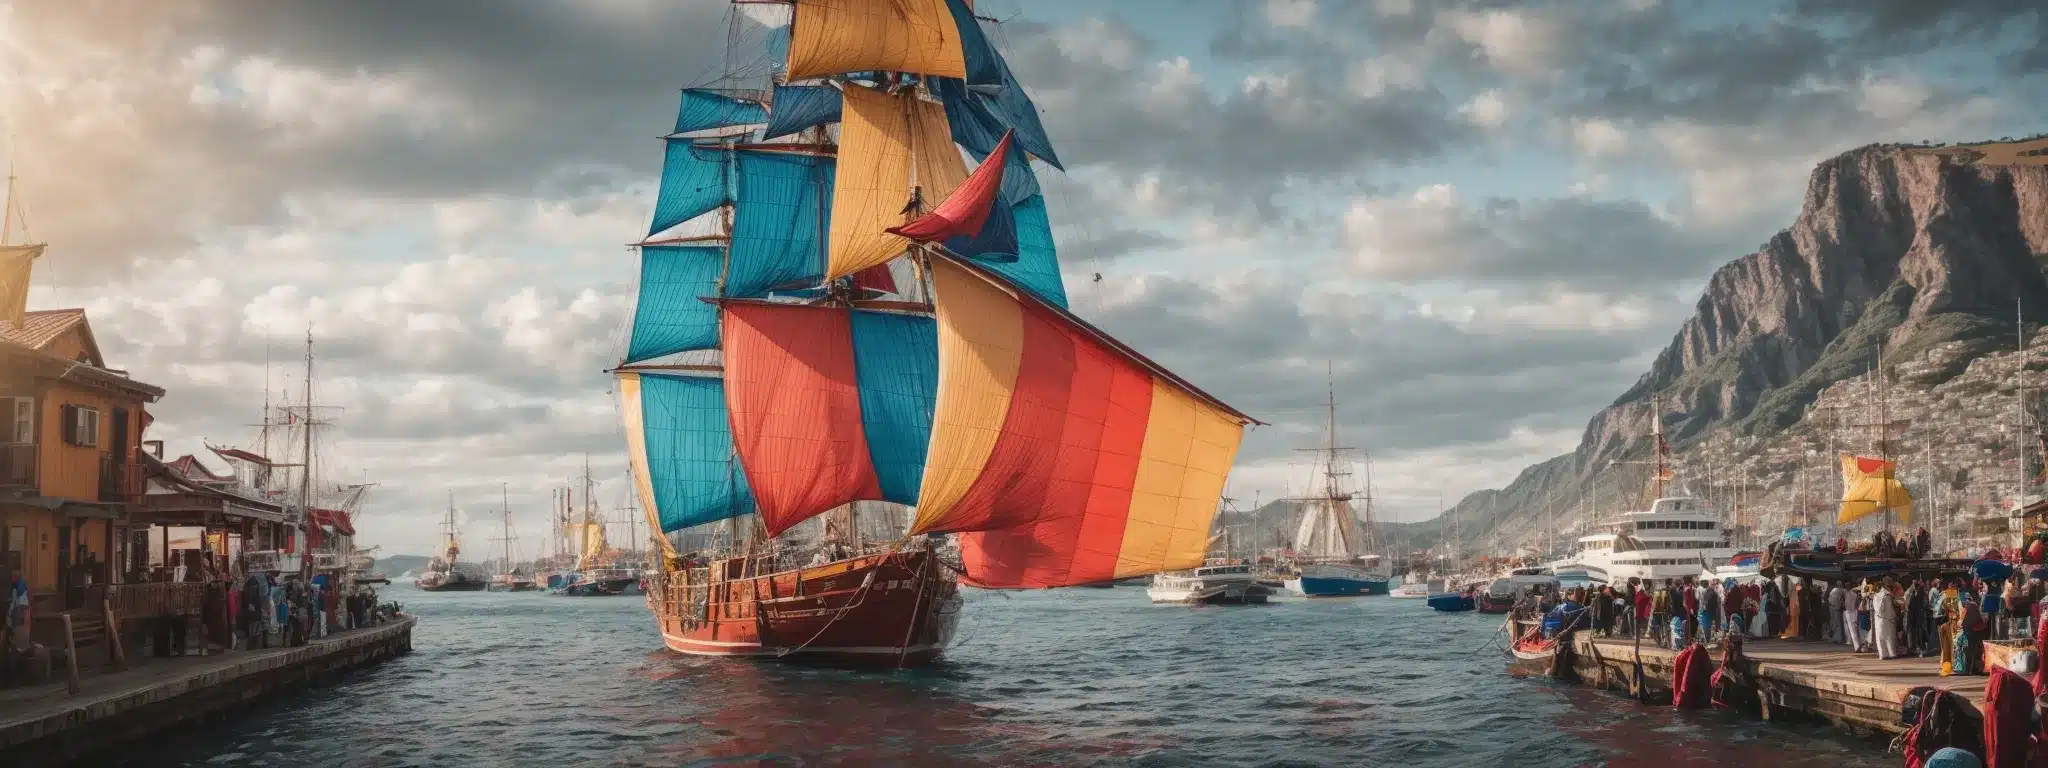 A Vibrant Ship Unfurls Its Unique, Brightly Colored Sails, Distinguishing Itself Amidst A Busy, Bustling Harbor.